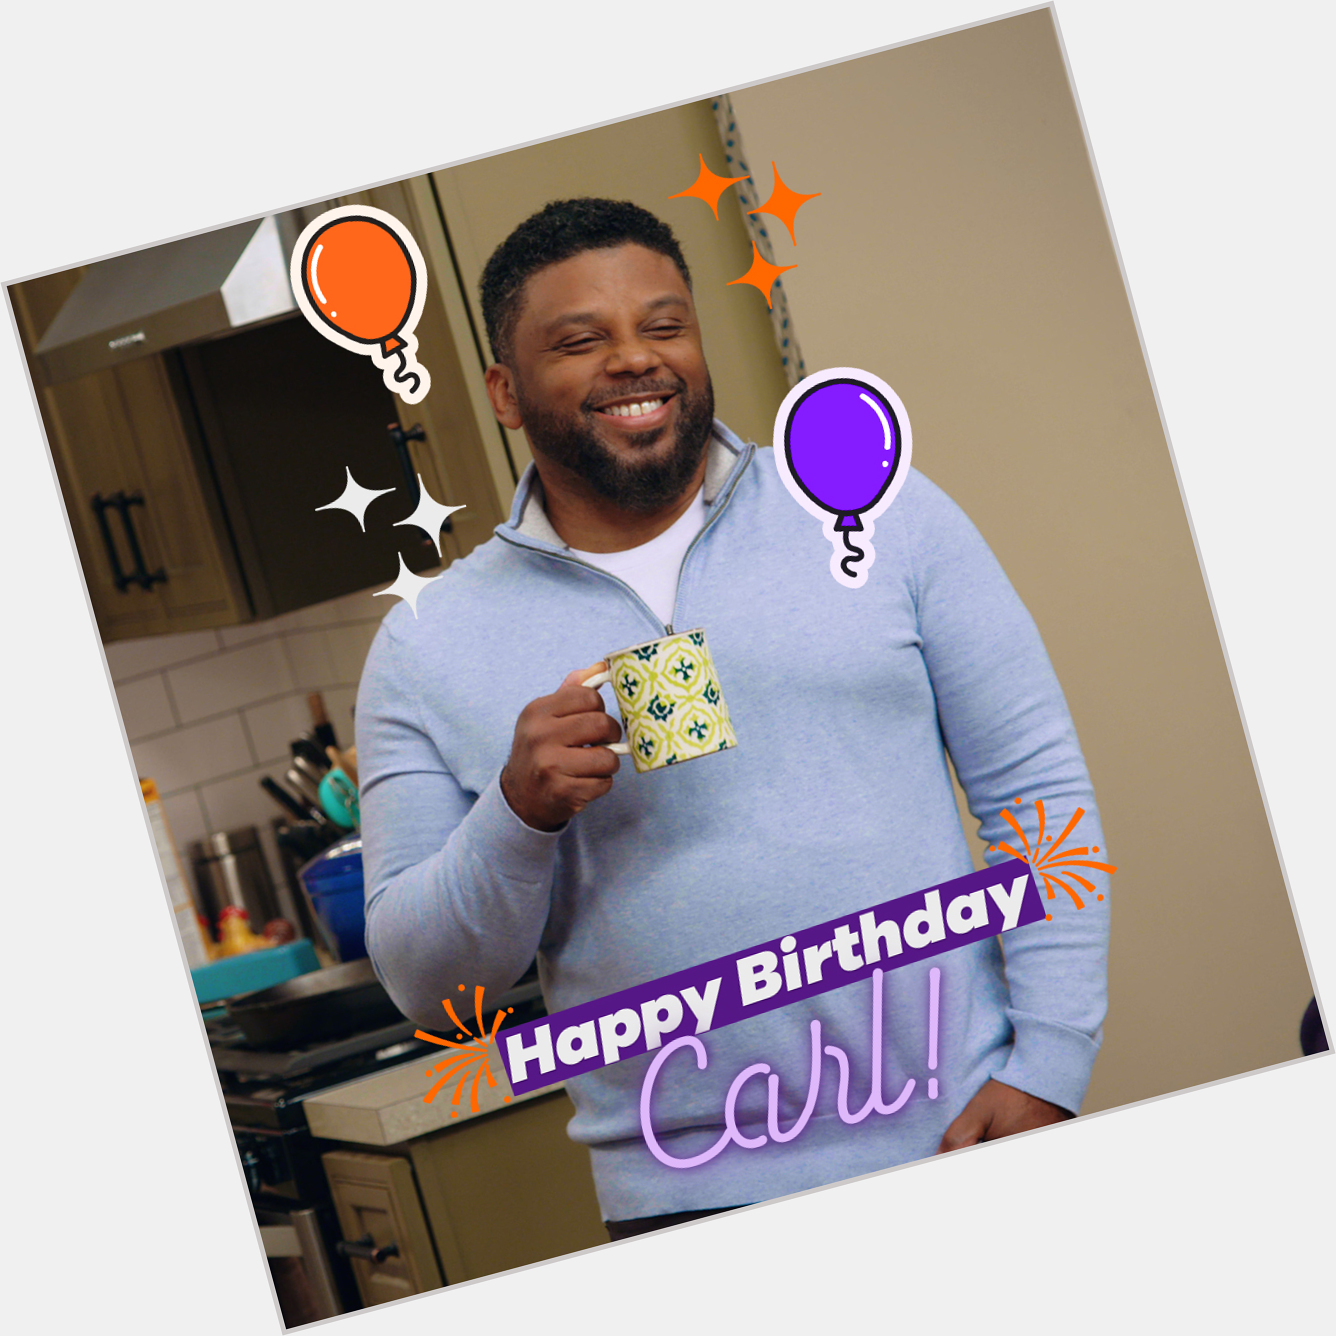 Wishing a happy birthday to one of our favorite dads, Carl Anthony Payne II! 